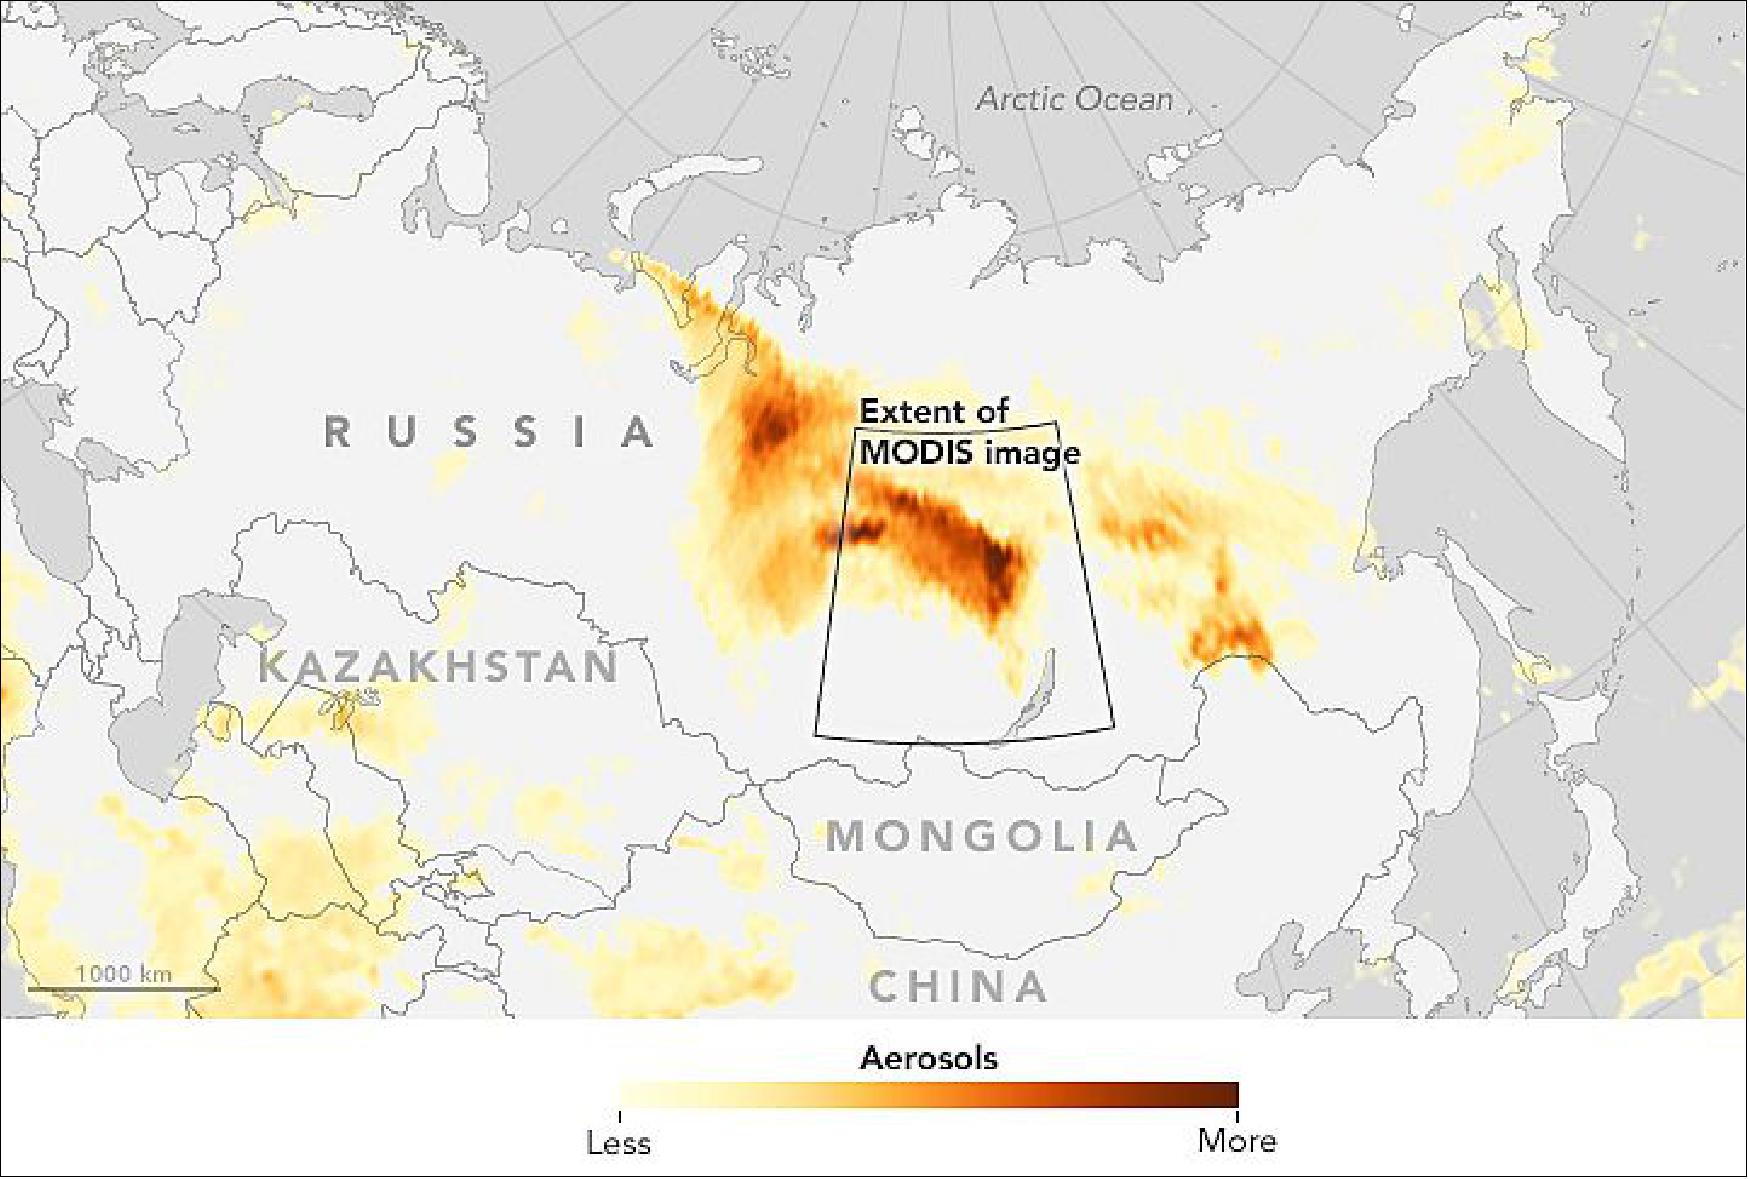 Figure 117: Aerosol concentrations over Russia acquired on Sept. 18, 2016 by the OMPS instrument on Suomi-NPP. High concentrations are represented with shades of deep red; the lowest concentrations are shades of light yellow (image credit: NASA Earth Observatory, image by Jeff Schmaltz)